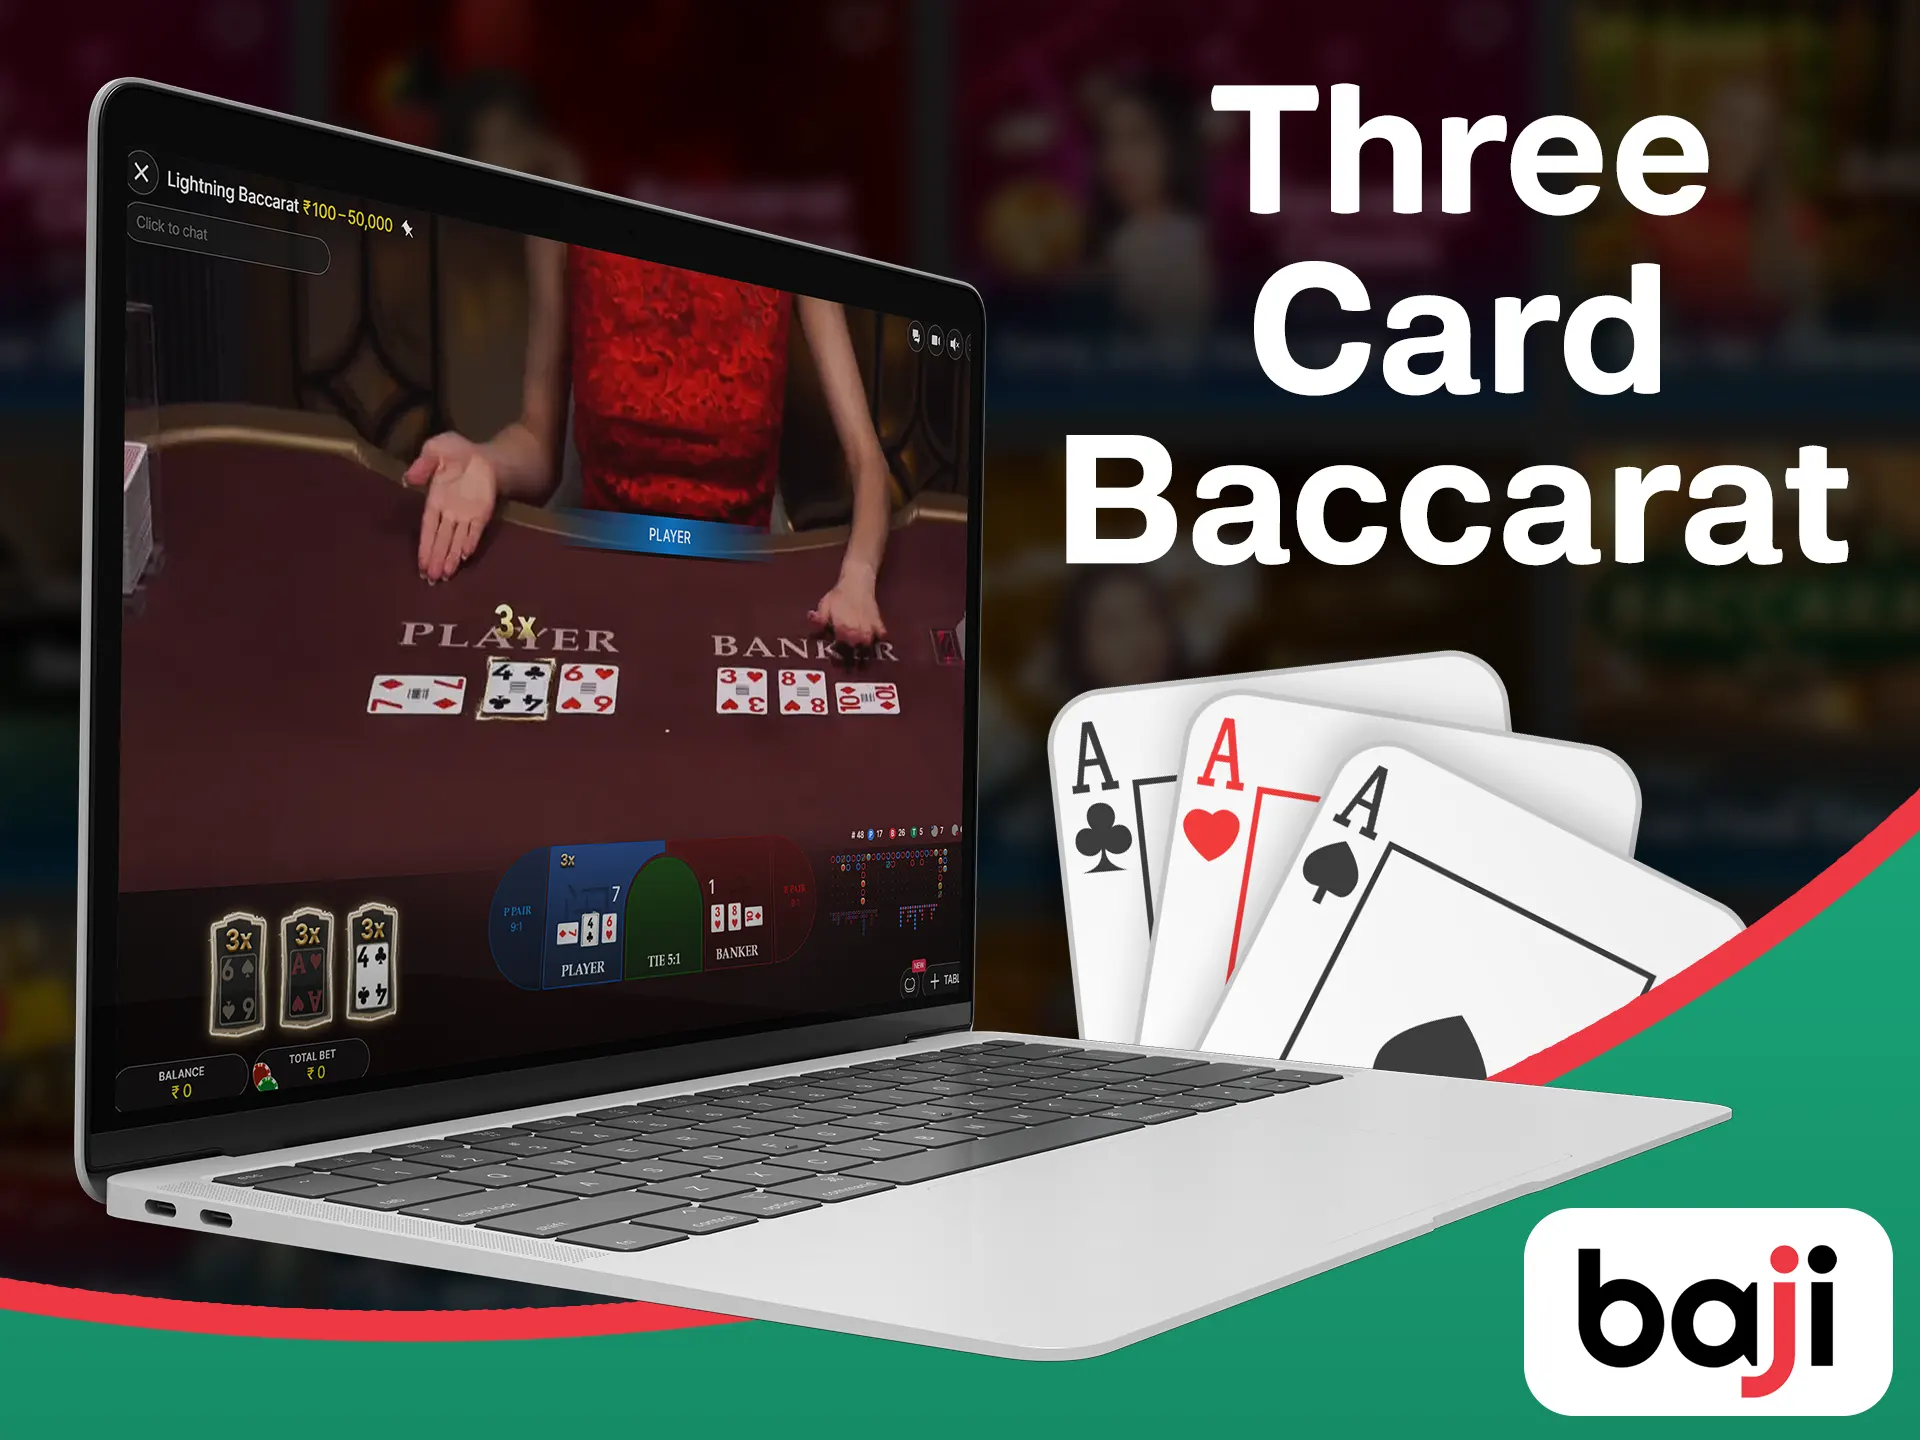 Play three card version of the baccarat game.